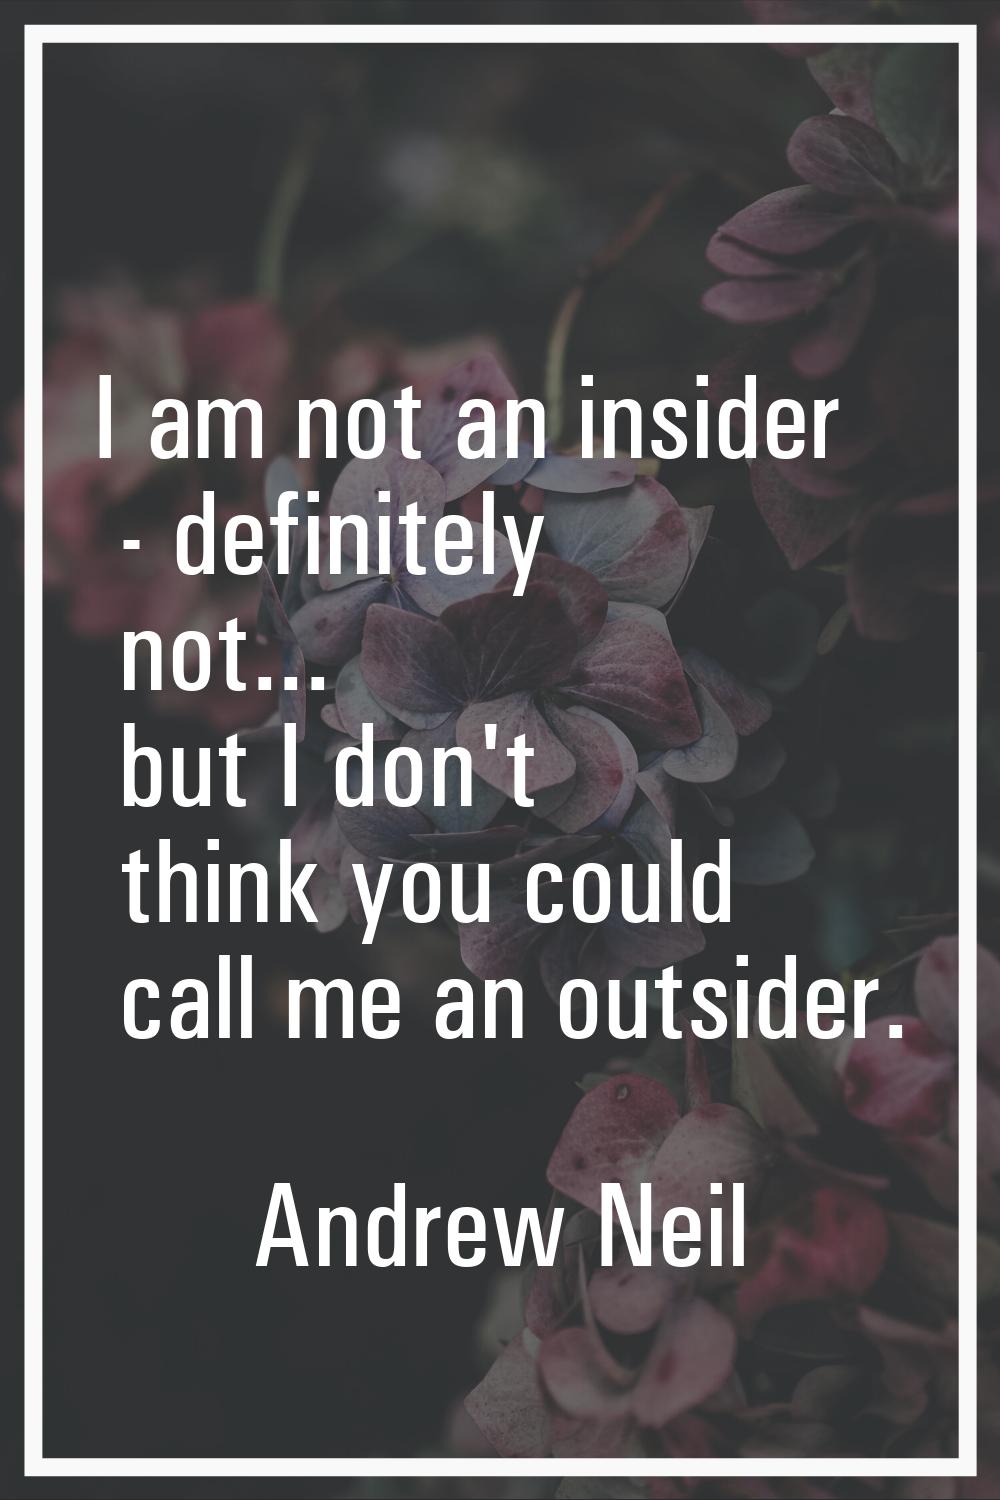 I am not an insider - definitely not... but I don't think you could call me an outsider.